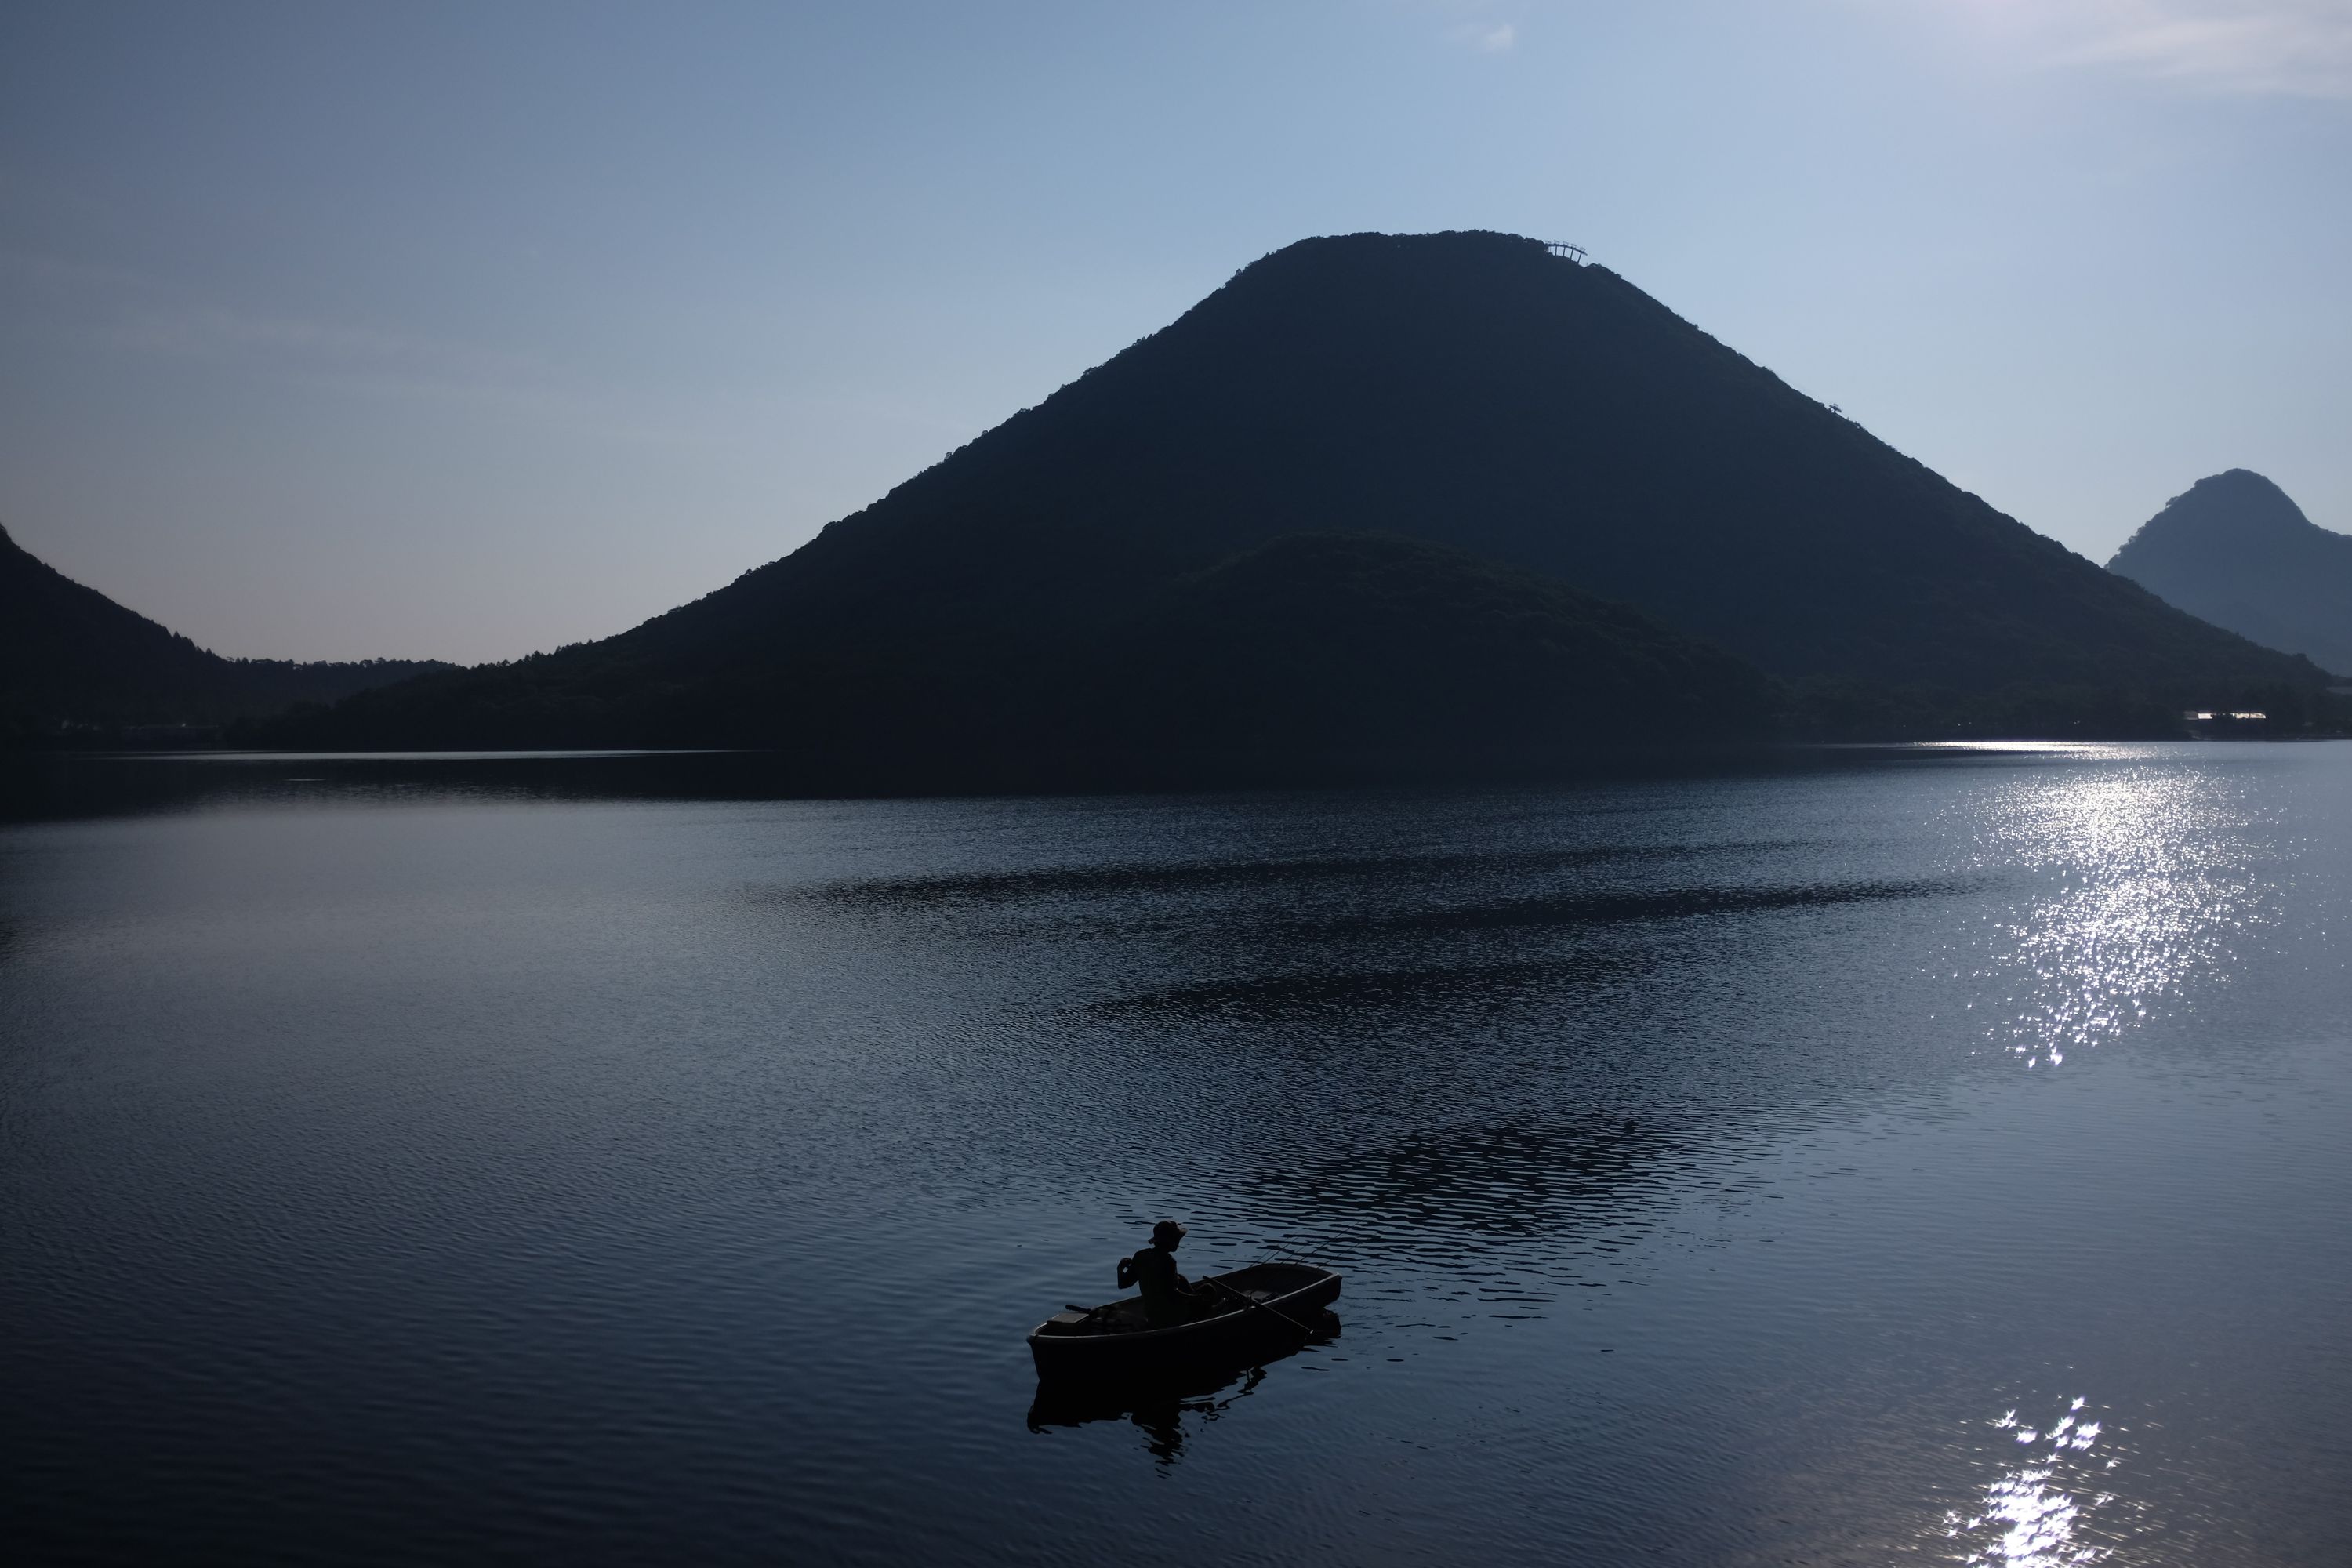 A man rows a boat on a lake in front of a perfect volcanic cone, Mount Haruna.